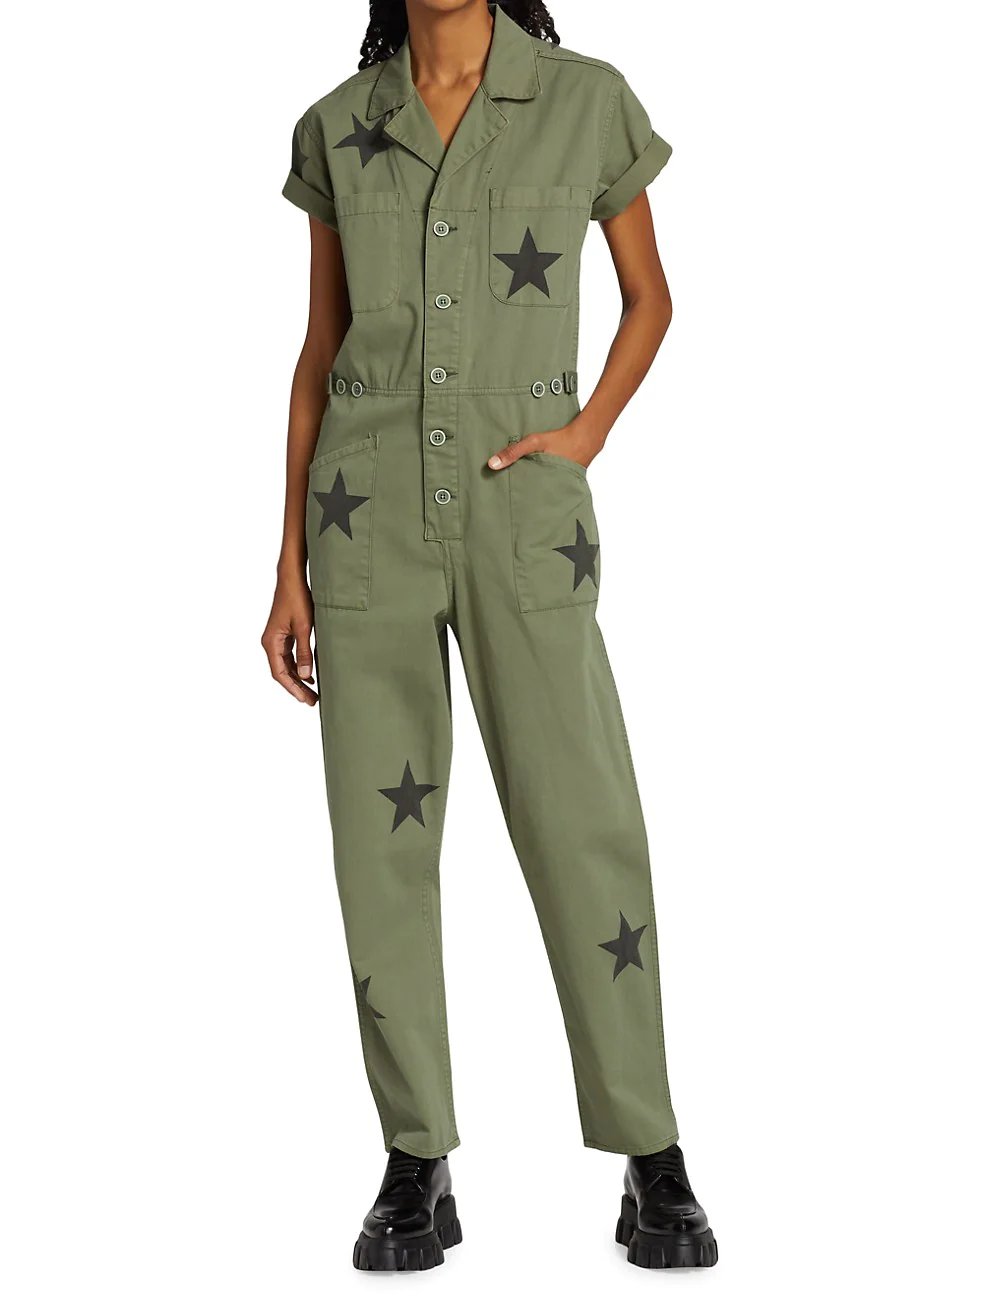 Only Murders In The Building S03 Cara Delevingne Star Jumpsuit